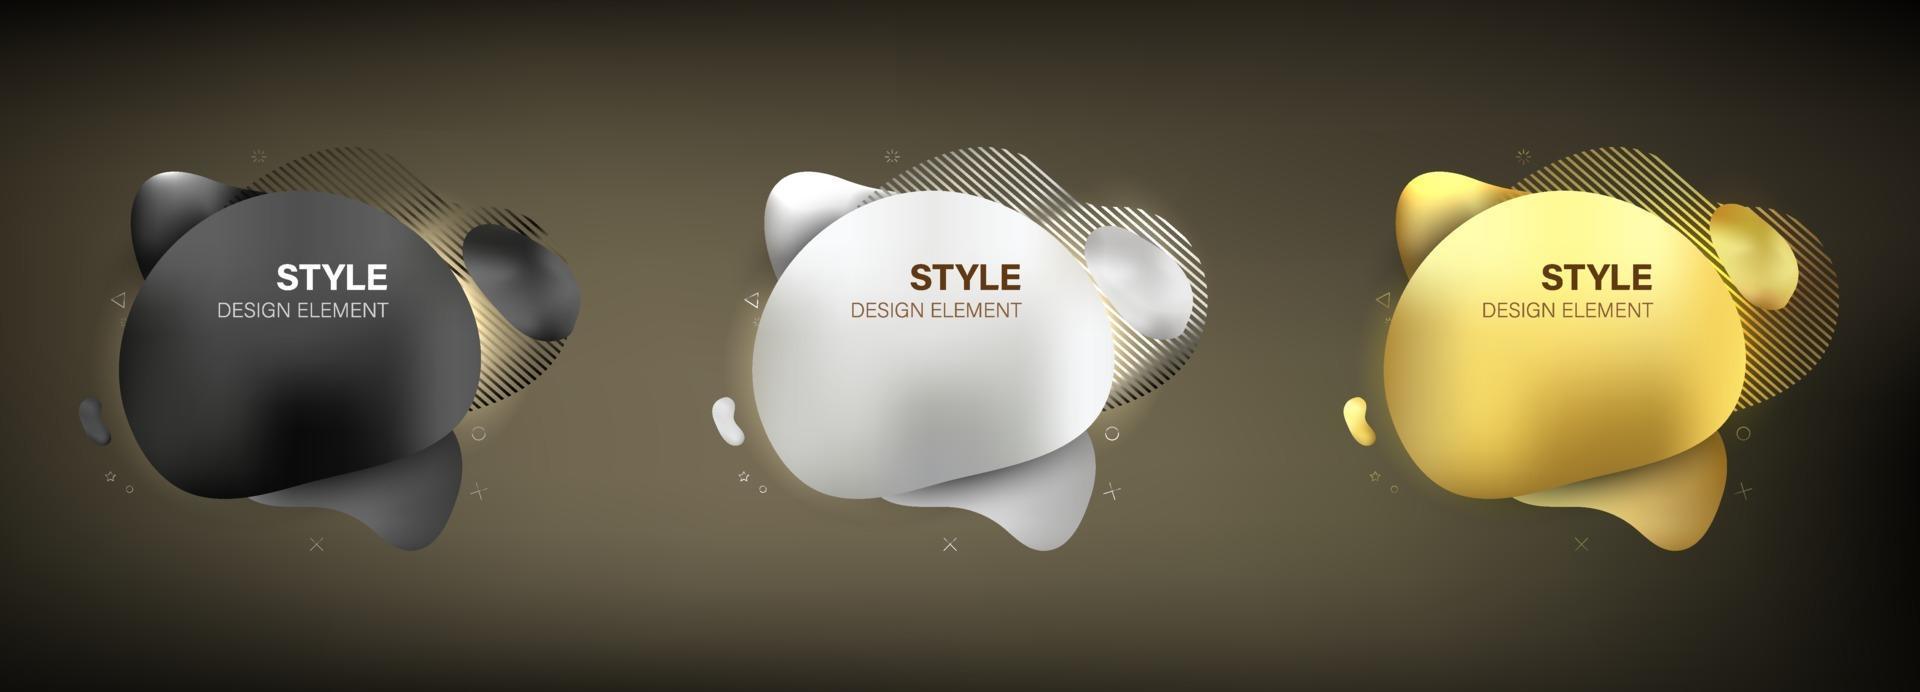 Abstract Style element Vector illustration color gold silver and black